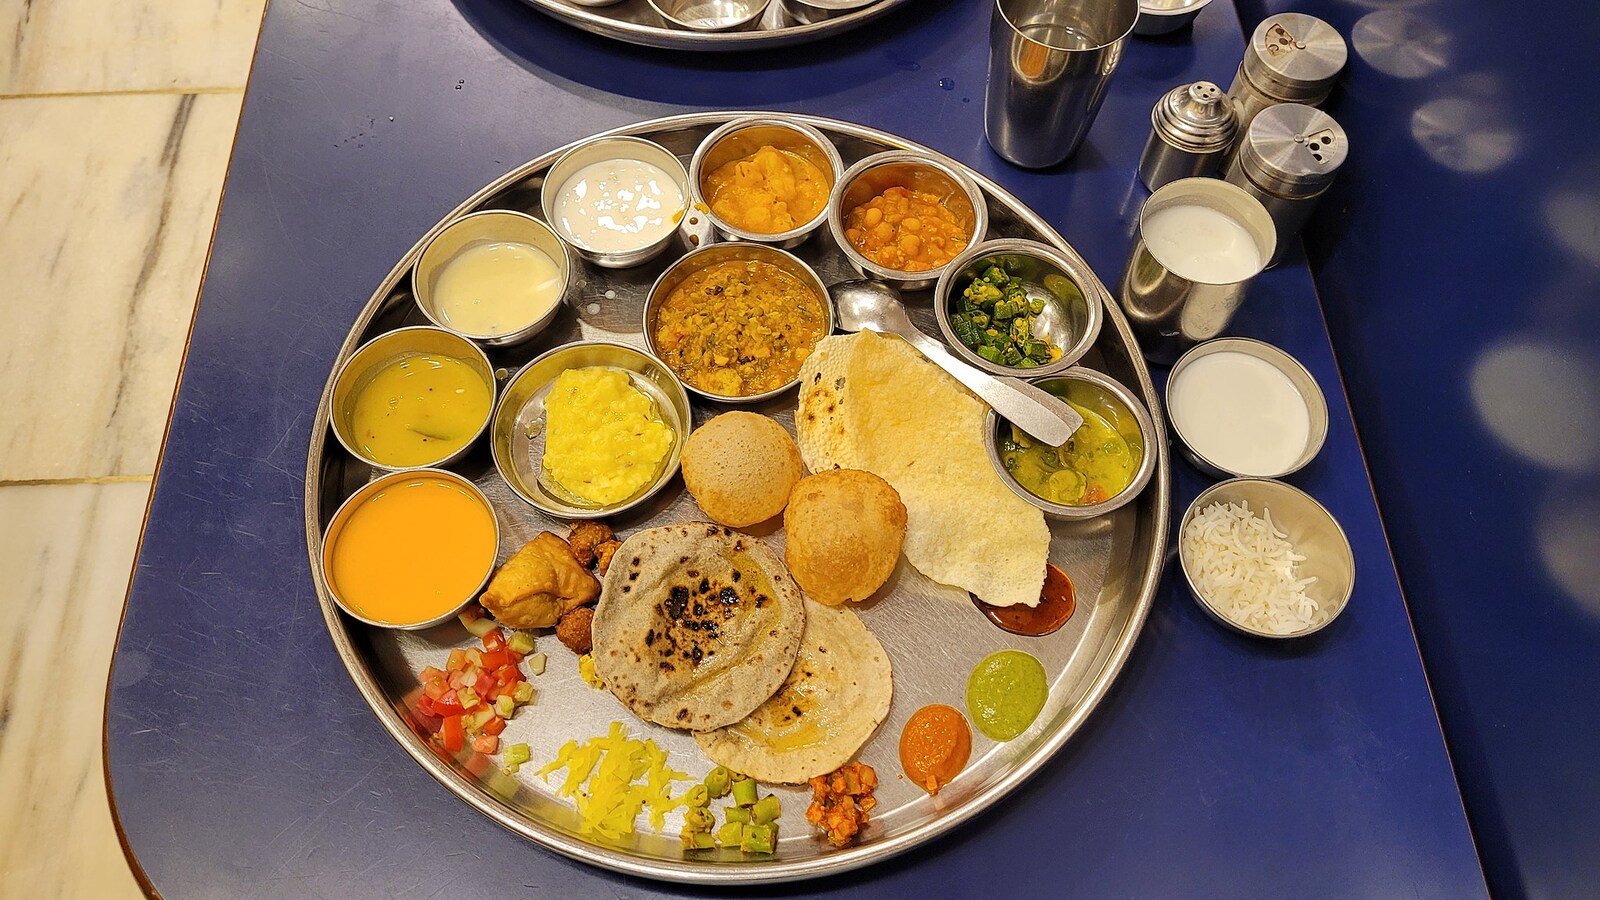 Vegetarian thali costs 28% more in July than June as tomato prices shoot  up: CRISIL